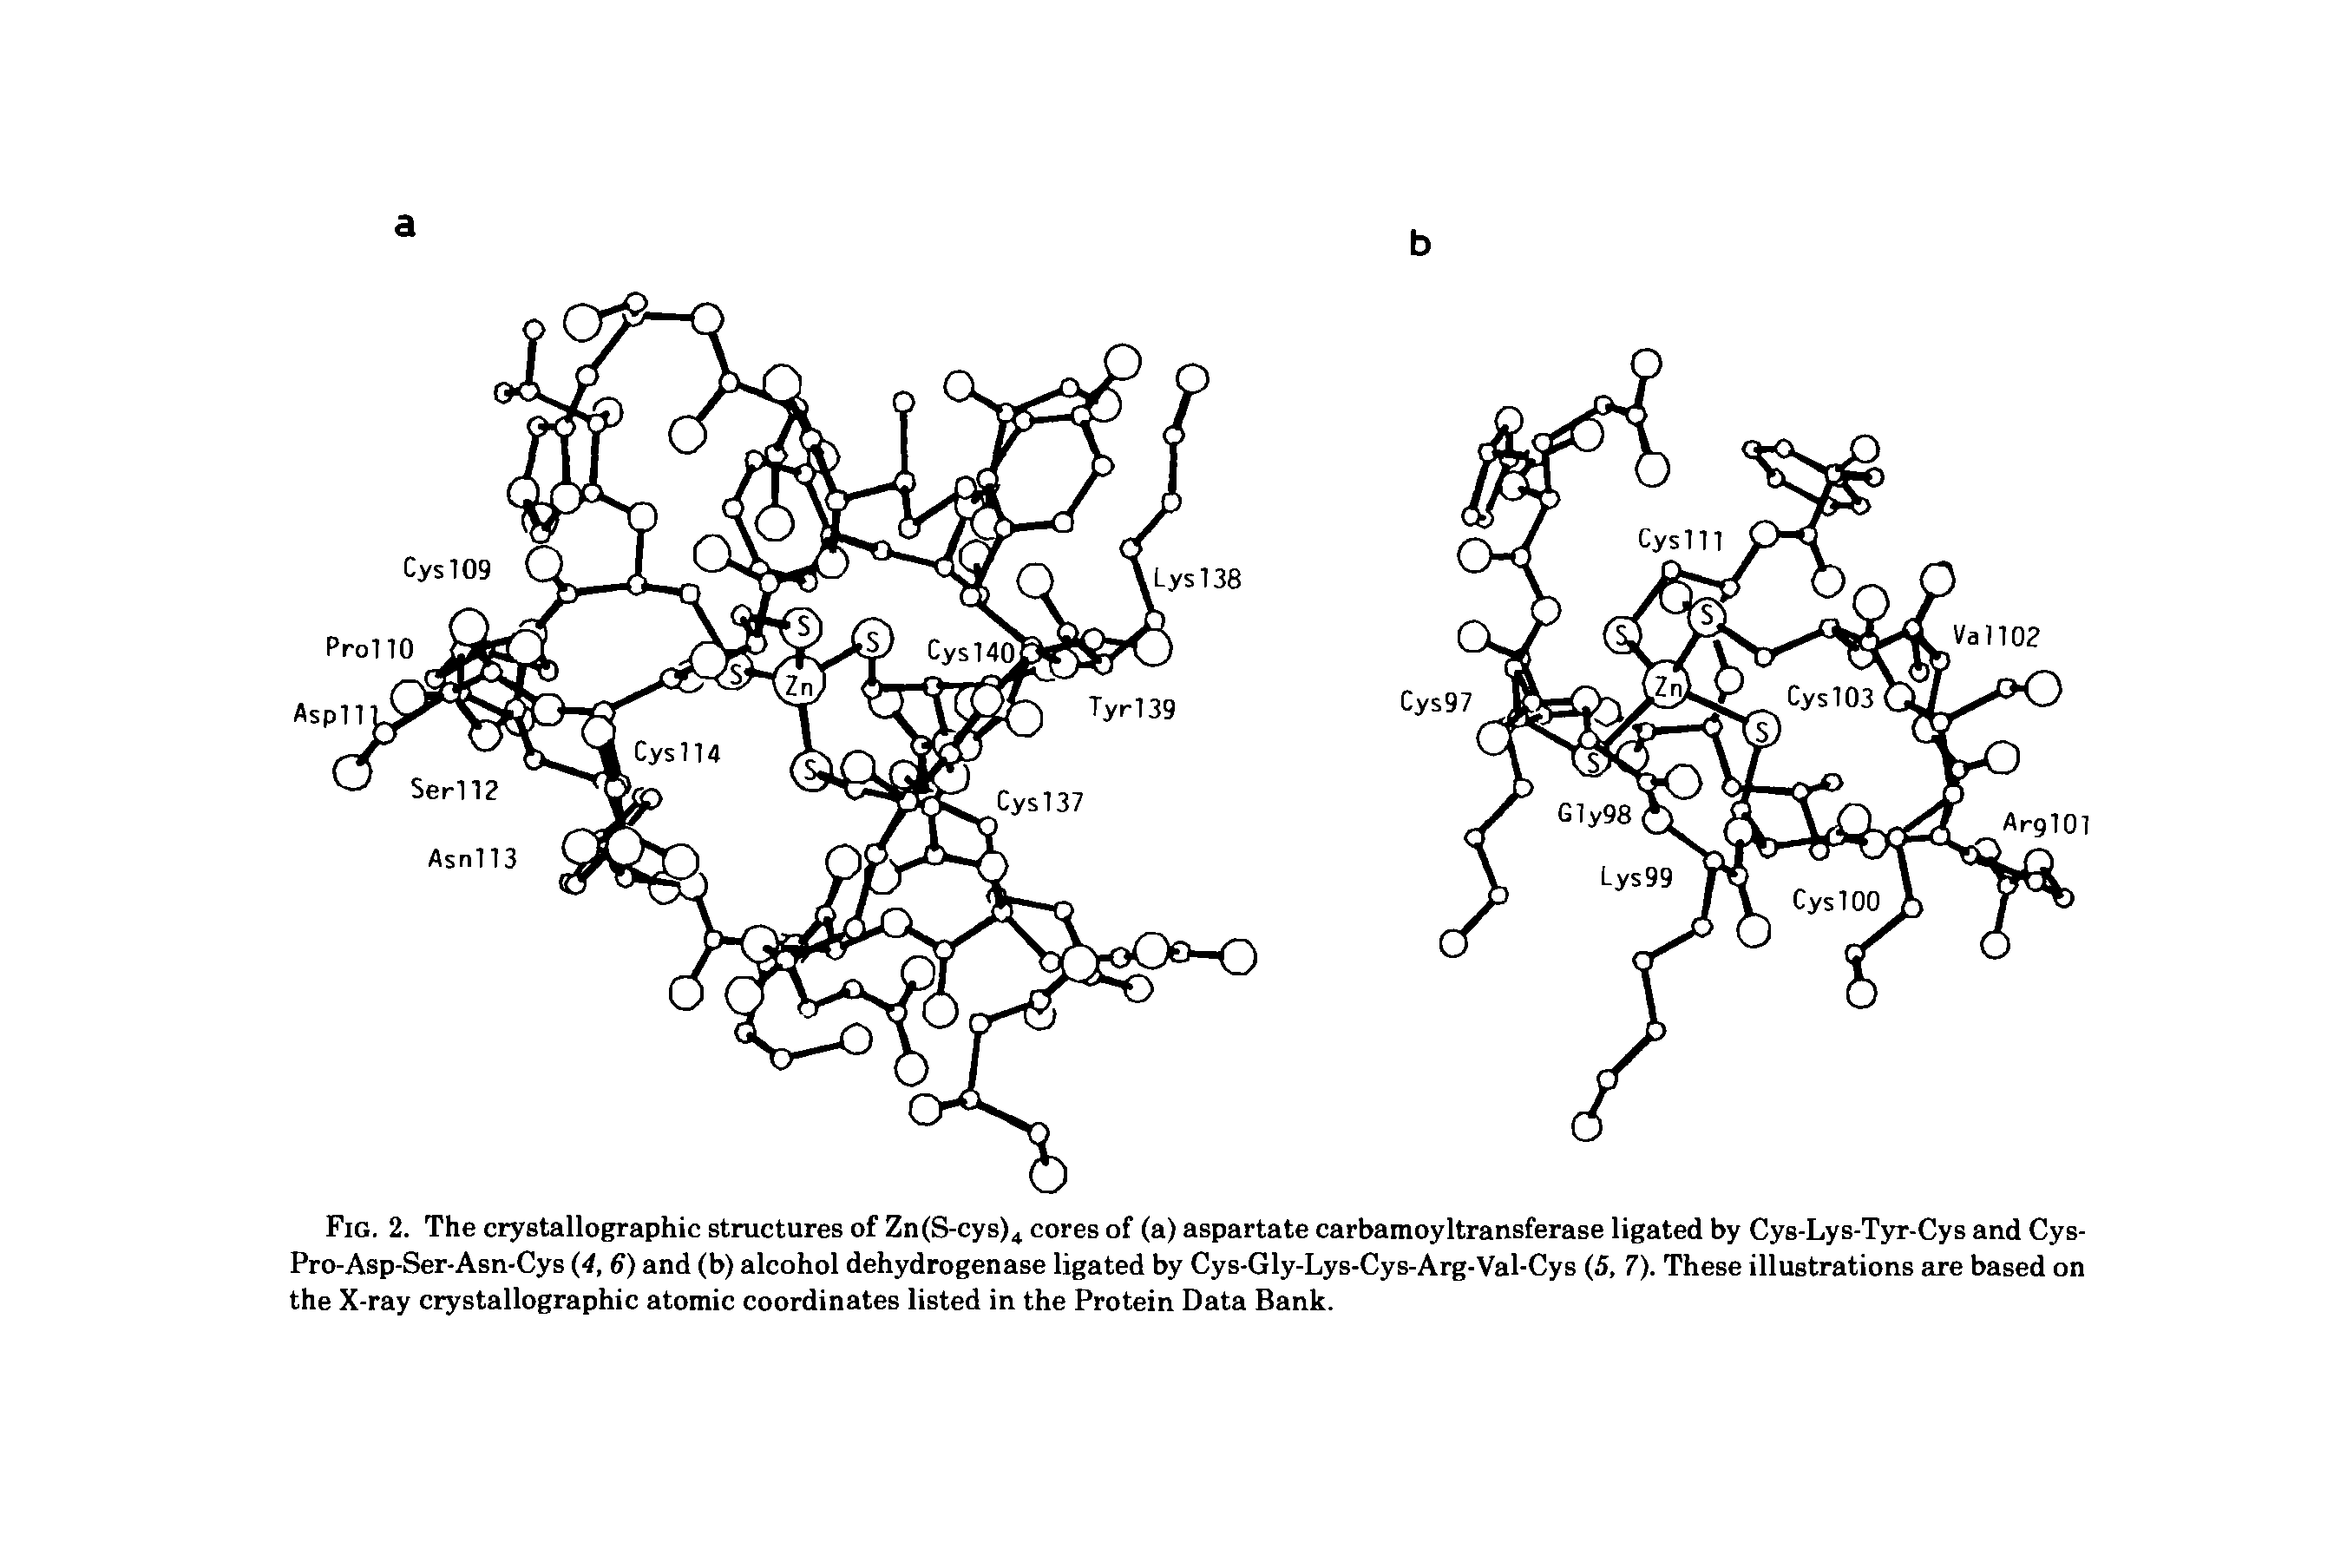 Fig. 2. The crystallographic structures of Zn(S-cys)4 cores of (a) aspartate carbamoyltransferase ligated by Cys-Lys-Tyr-Cys and Cys-Pro-Asp-Ser-Asn-Cys (4, 6) and (b) alcohol dehydrogenase ligated by Cys-Gly-Lys-Cys-Arg-Val-Cys (5, 7). These illustrations are based on the X-ray crystallographic atomic coordinates listed in the Protein Data Bank.